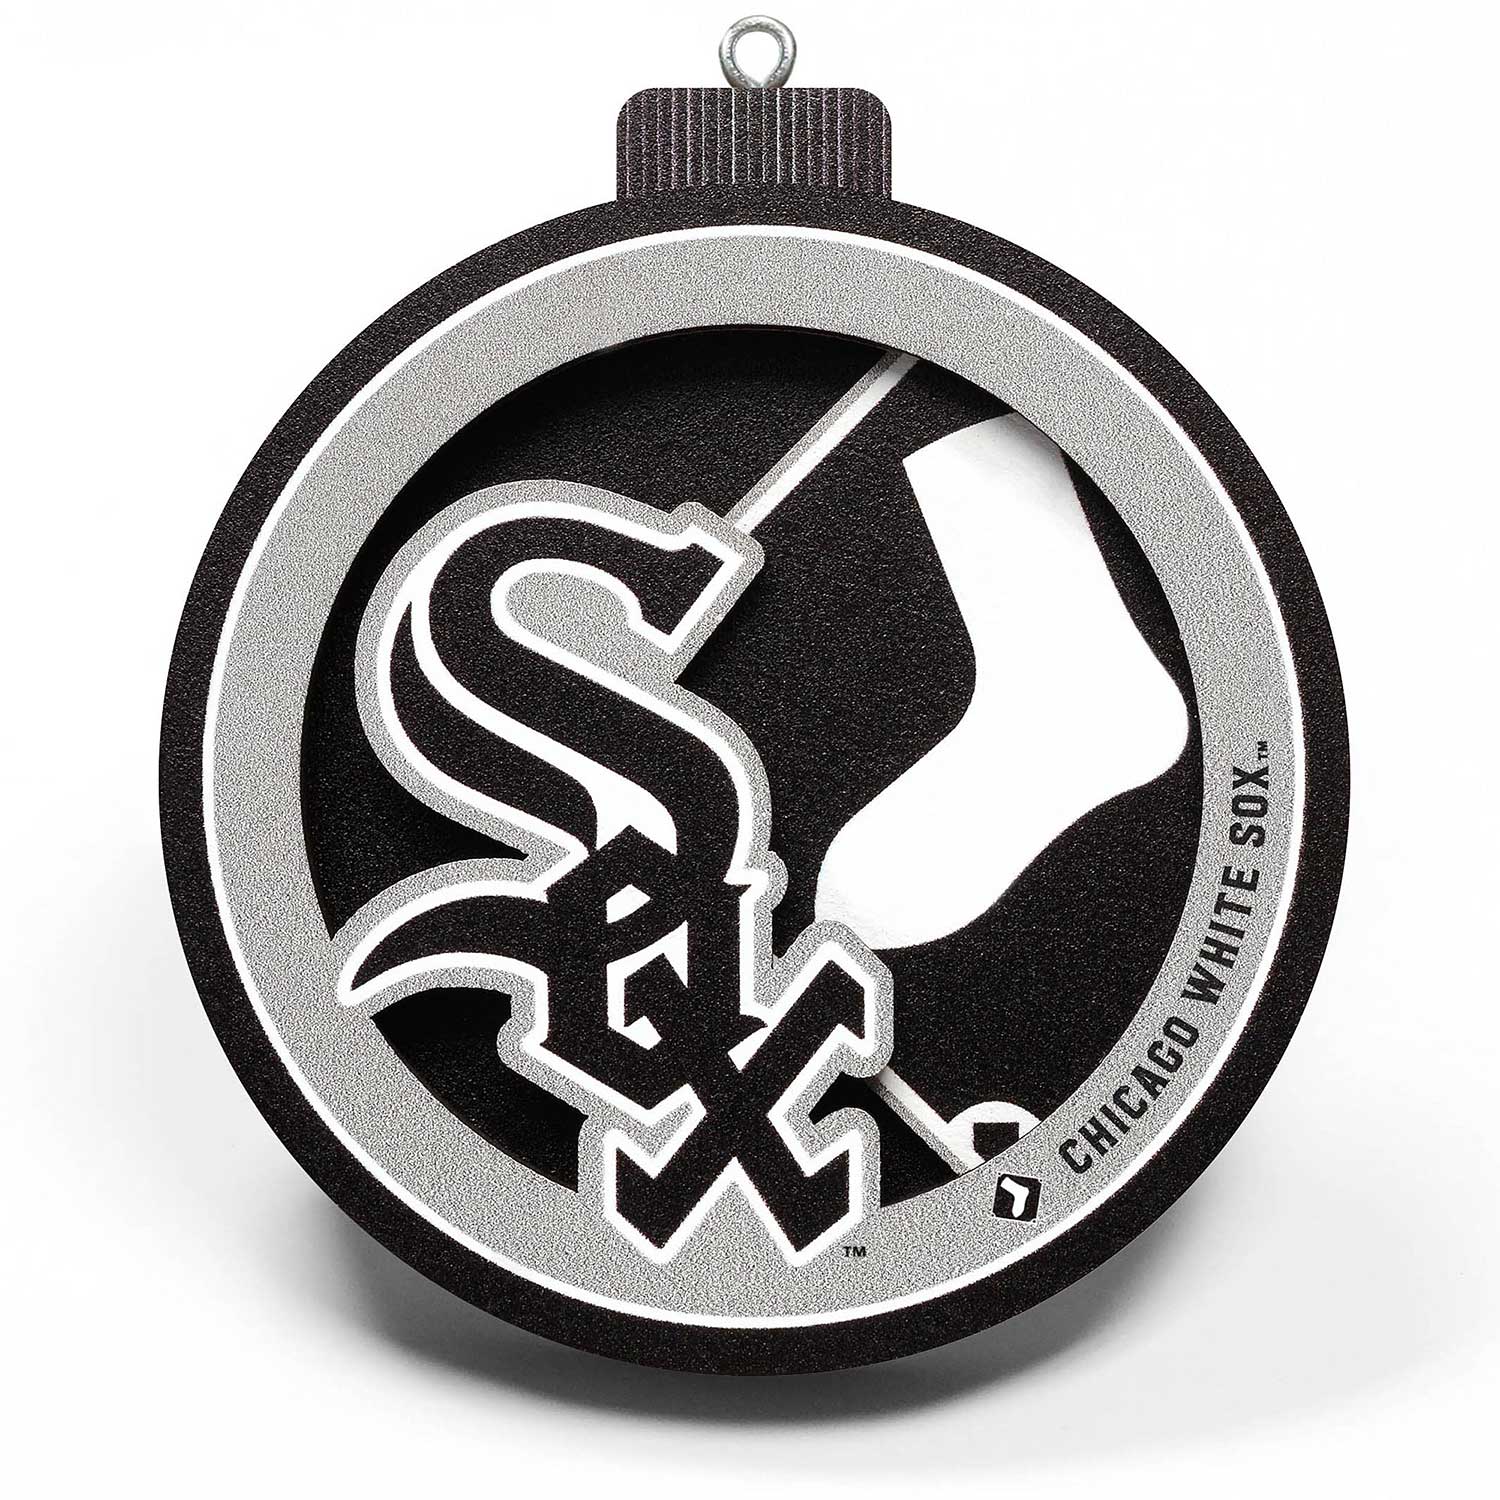 MLB Chicago White Sox logo coloring pages